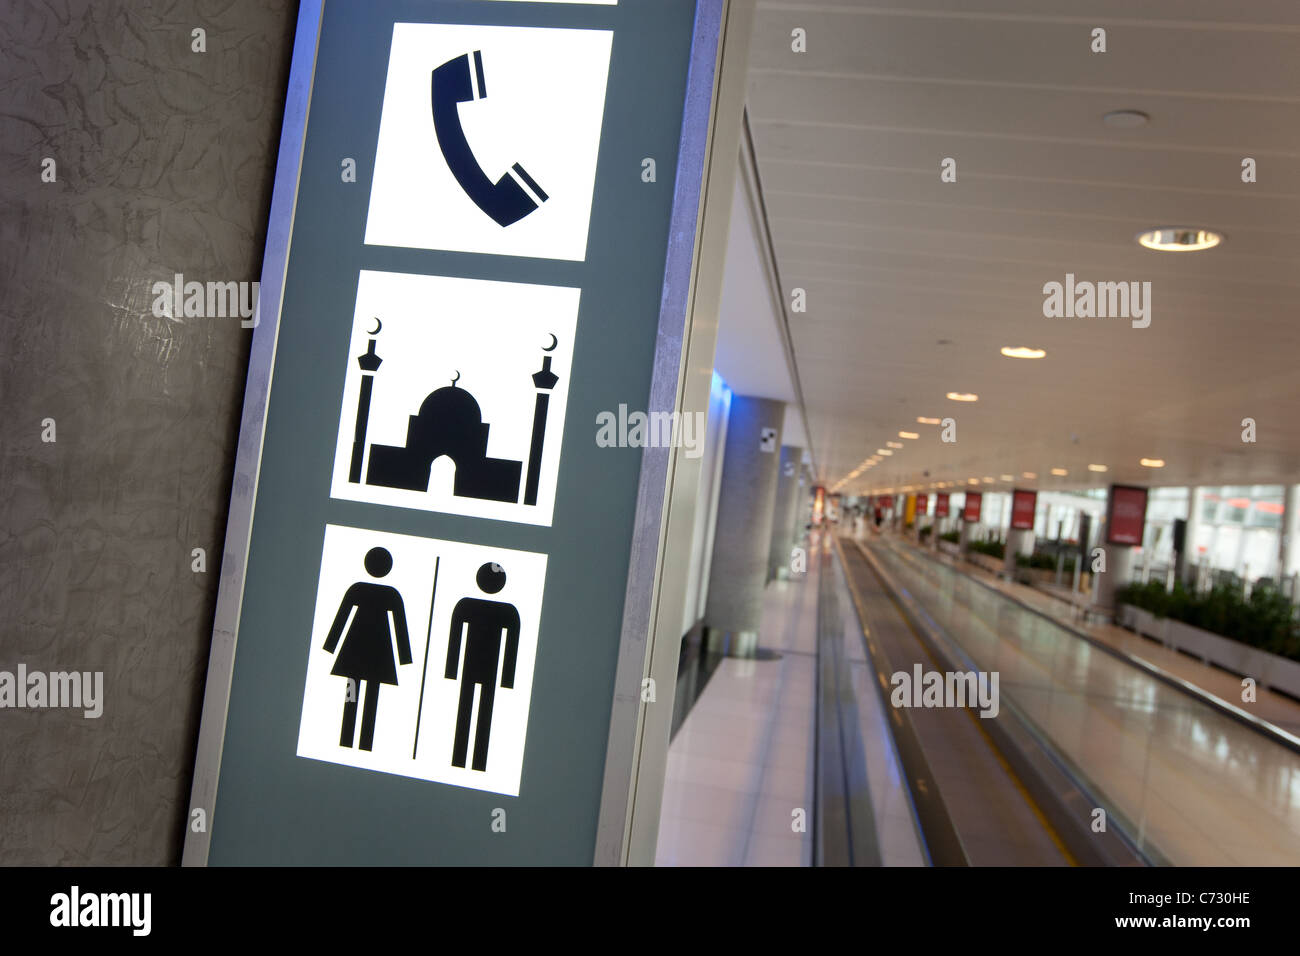 Signs in Abu Dhabi airport indicating location of mosque prayer room, telephones and toilets. Abu Dhabi, UAE. Stock Photo